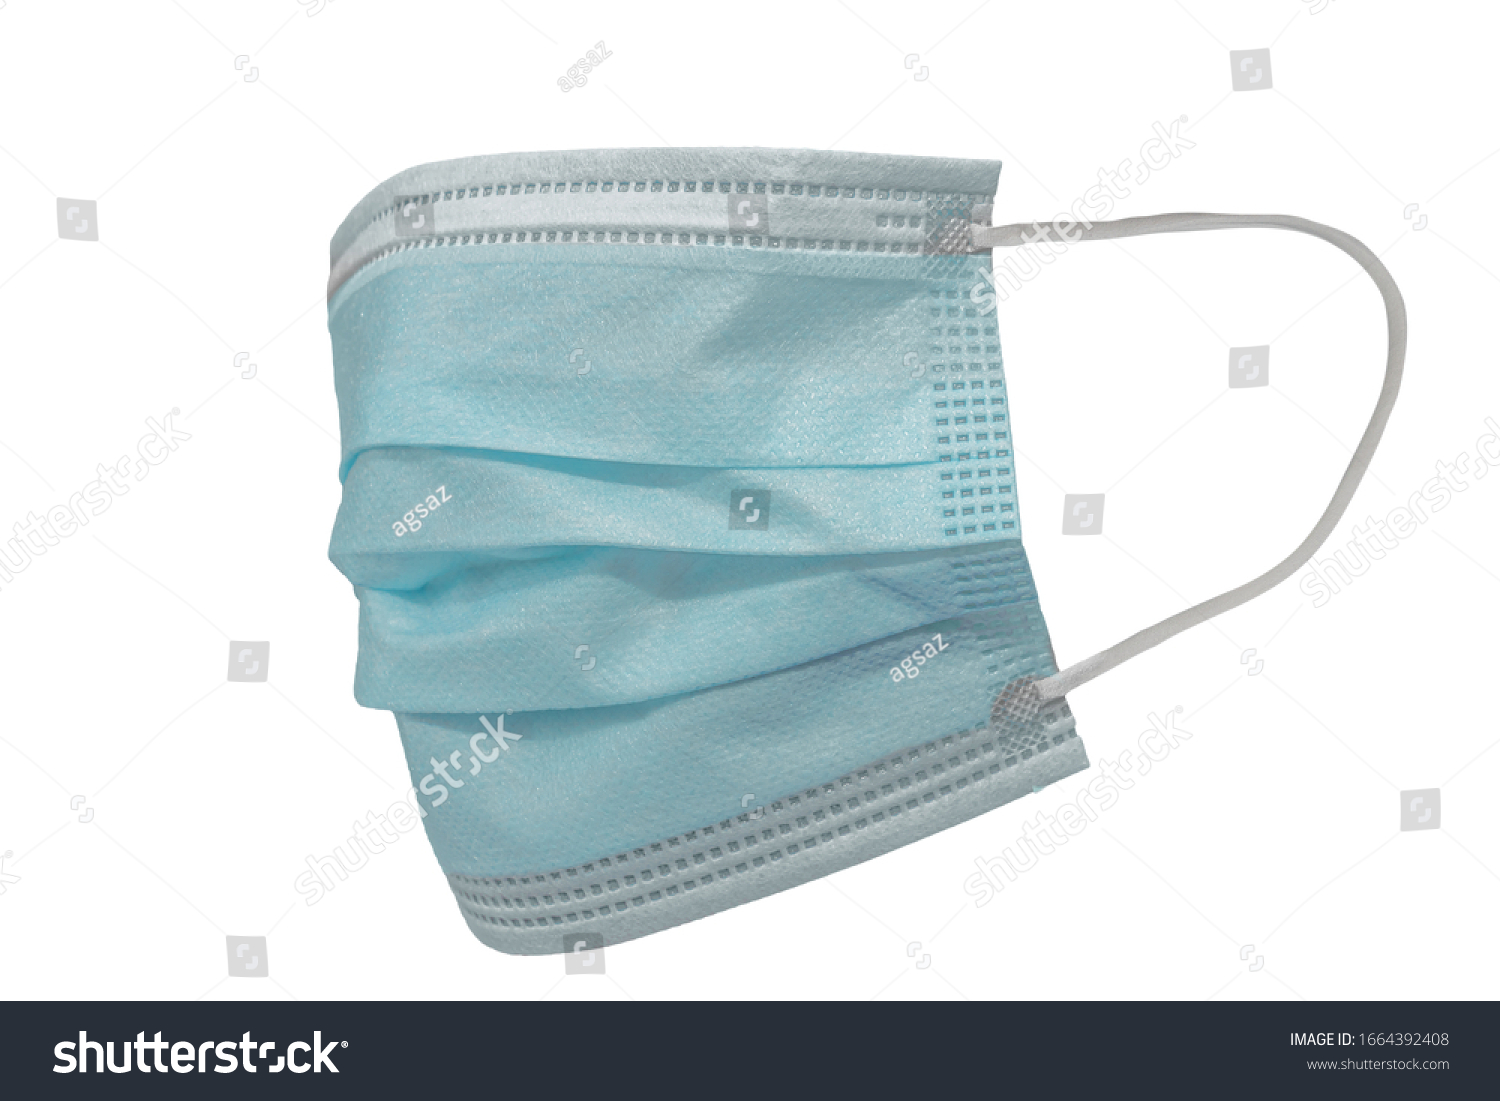 Surgical mask with rubber ear straps. Typical 3-ply surgical mask to cover the mouth and nose. Procedure mask from bacteria. Protection concept. #1664392408